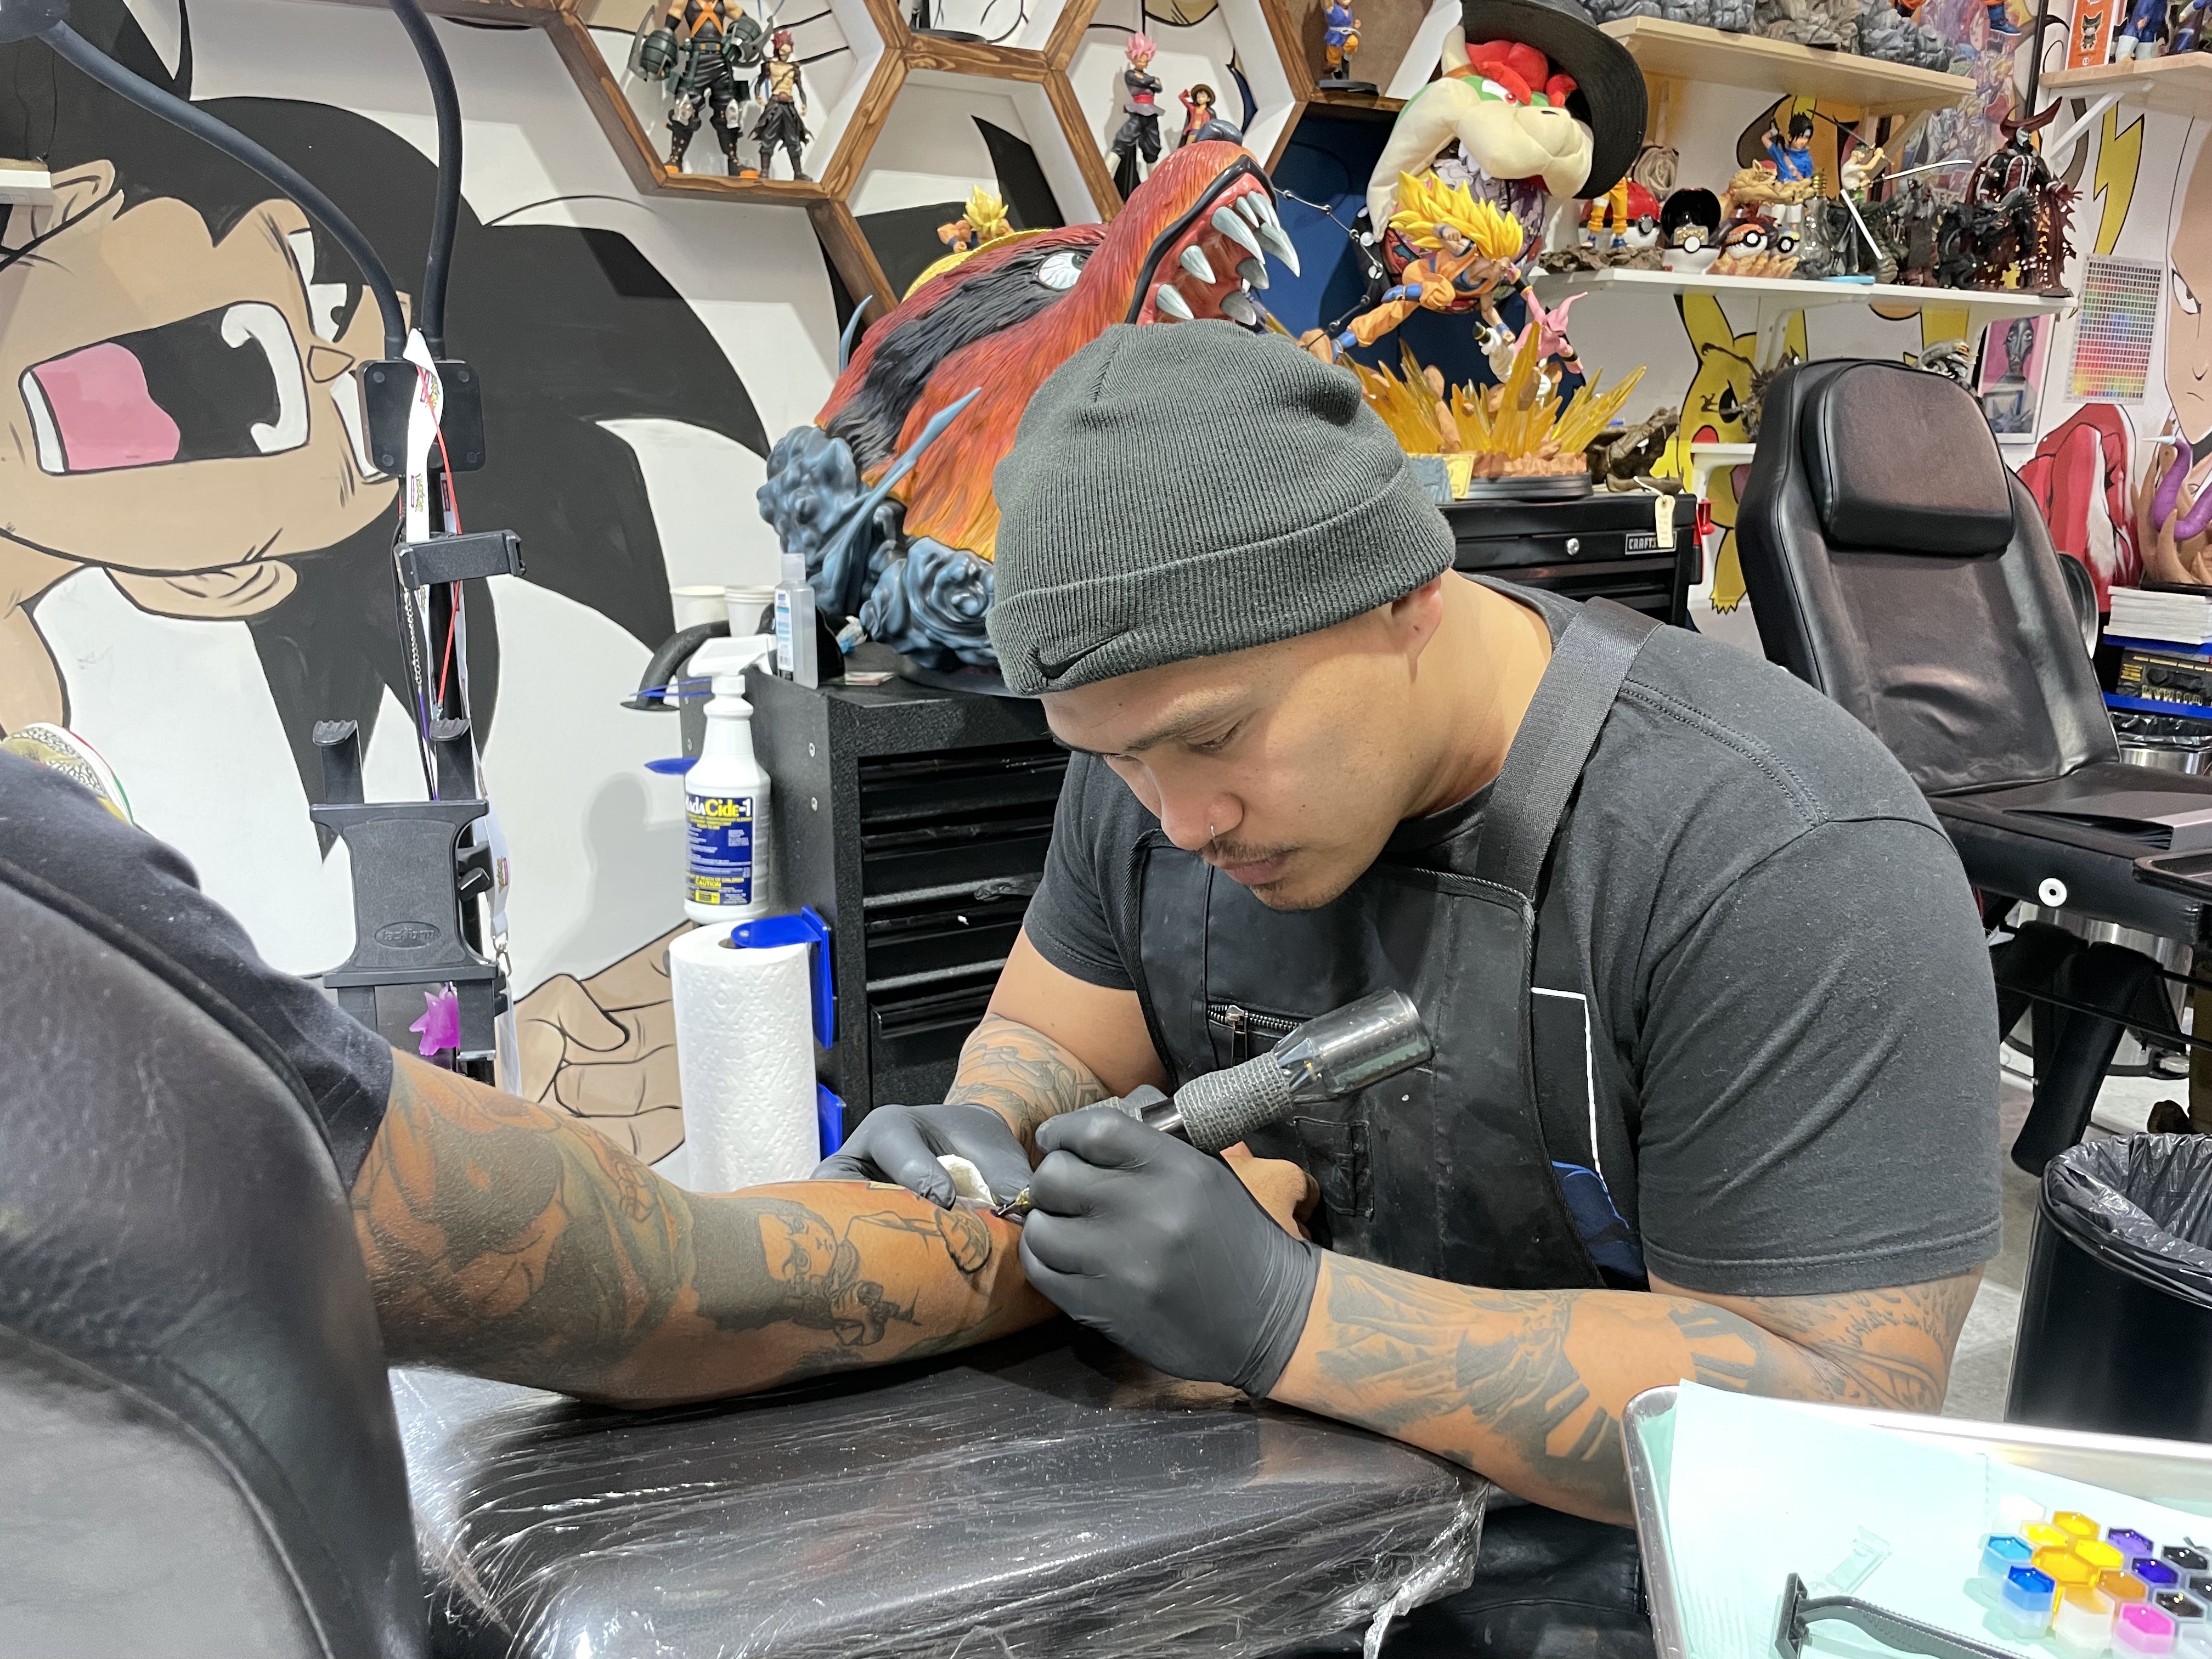 33 Anime Tattoos From Sailor Moon To Cowboy Bebop